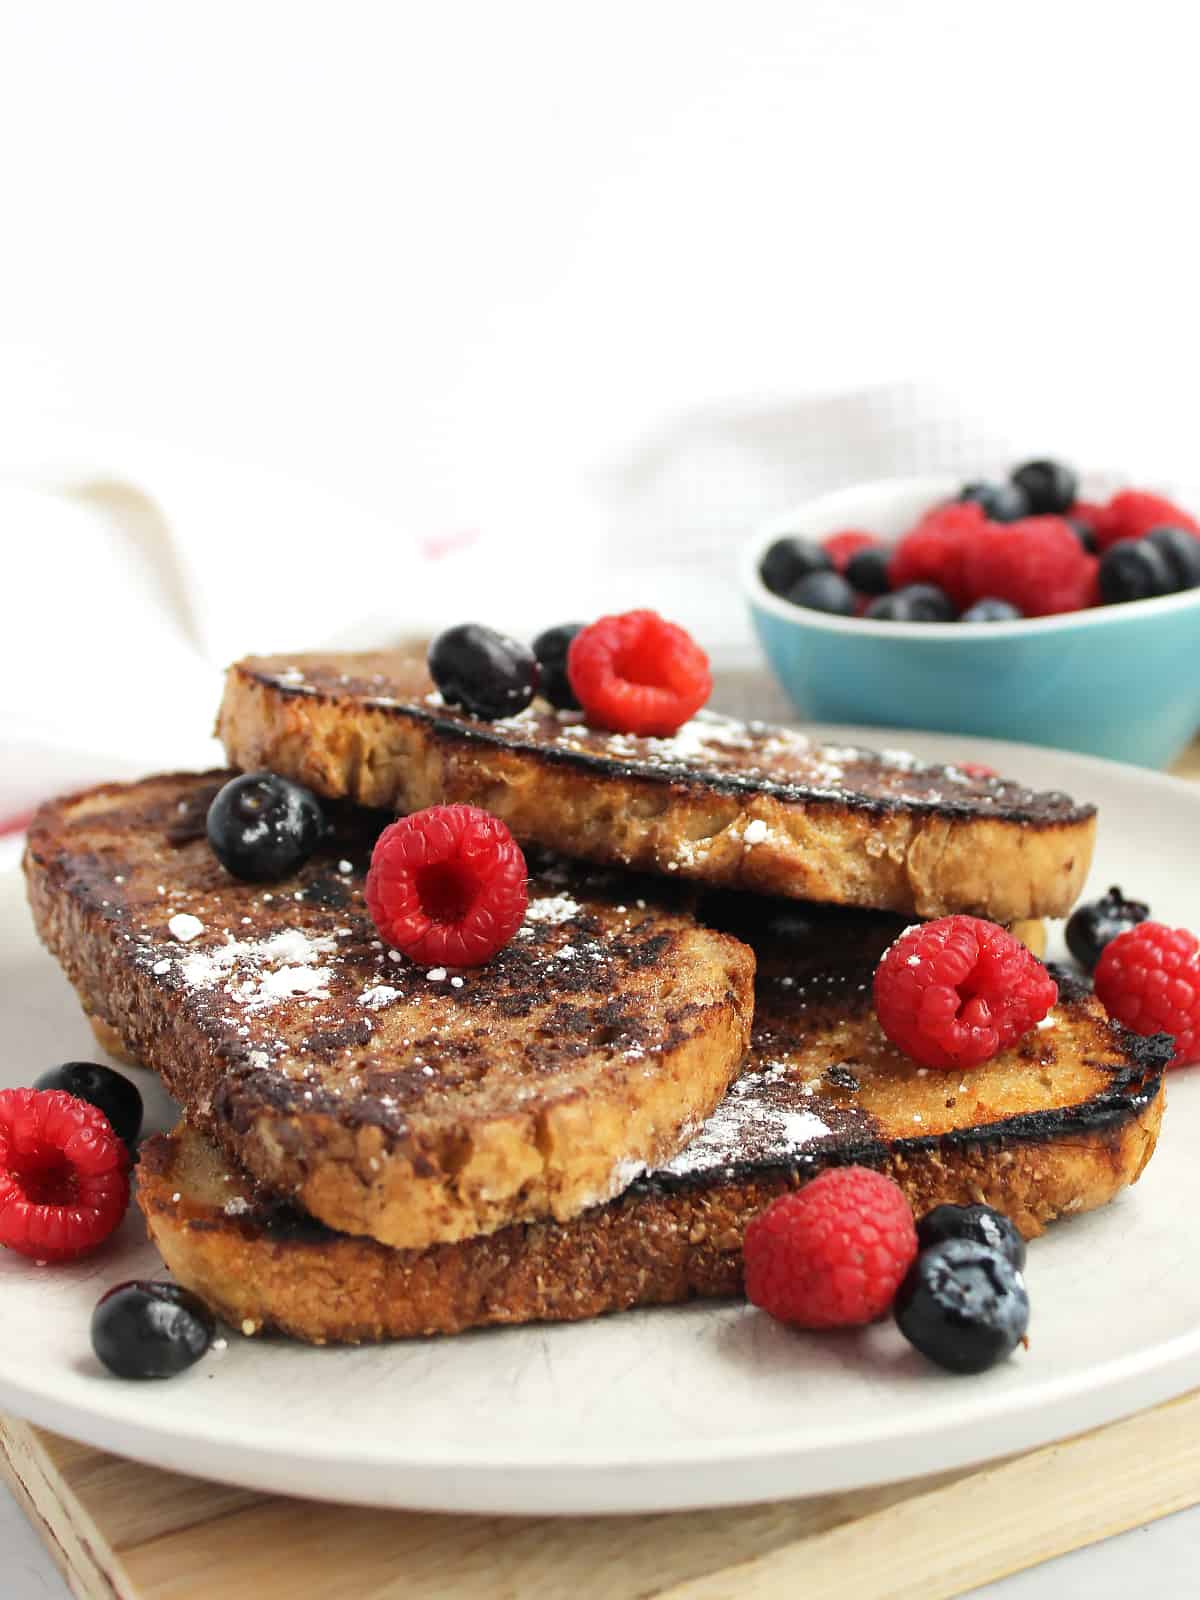 French toast served on a plate with powdered sugar and fresh berries.